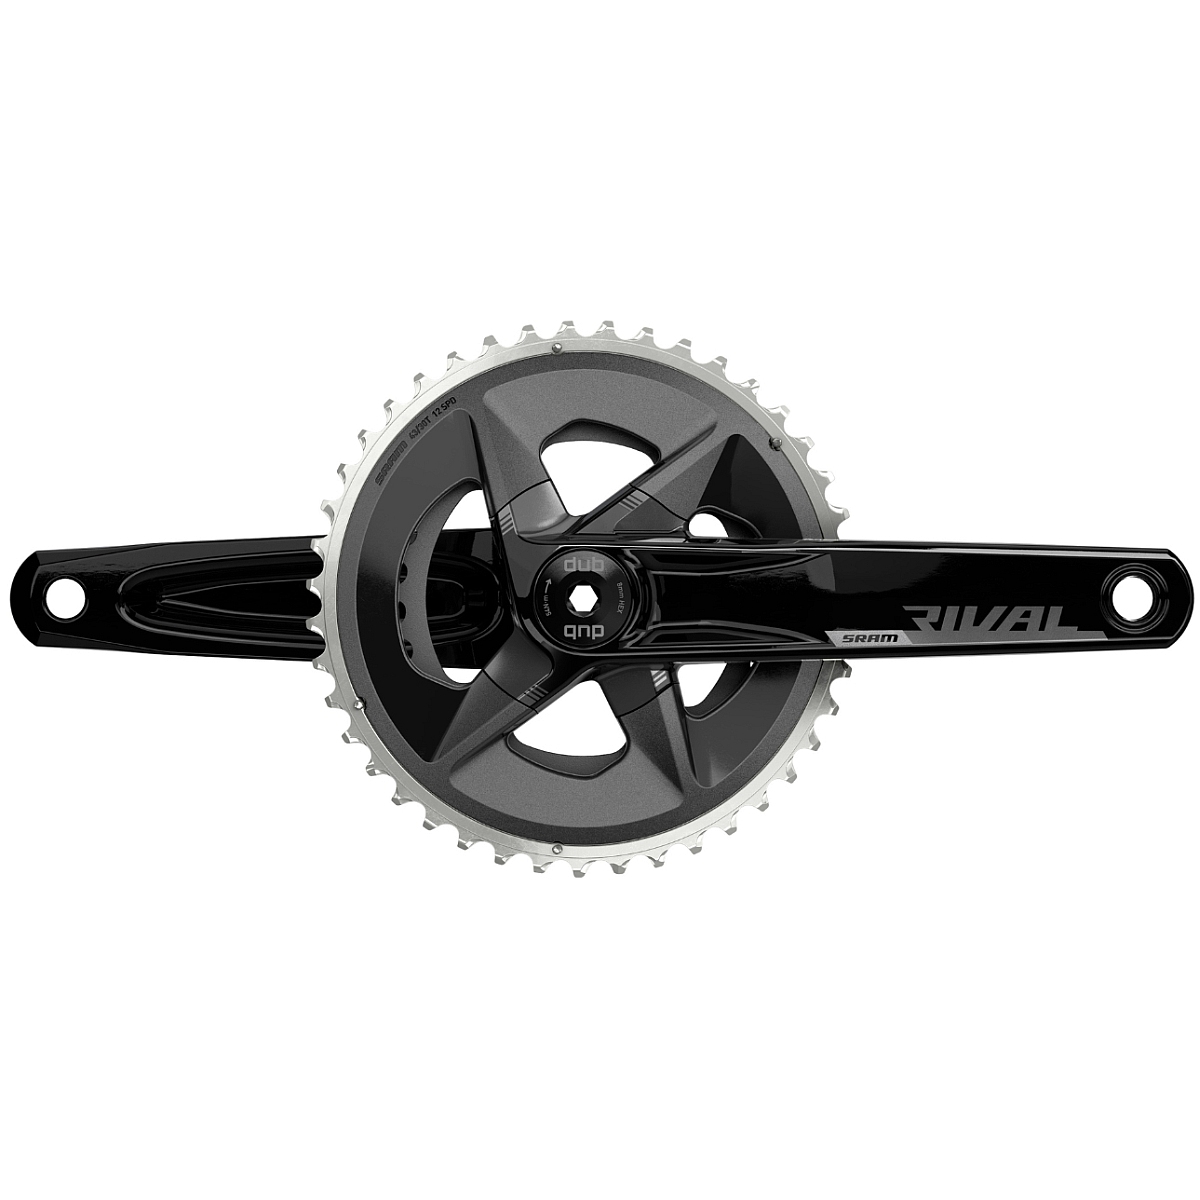 Picture of SRAM Rival Wide (D1) Crankset 2x12-speed - 43/30 Teeth - DUB - black - Chainline 47.5mm